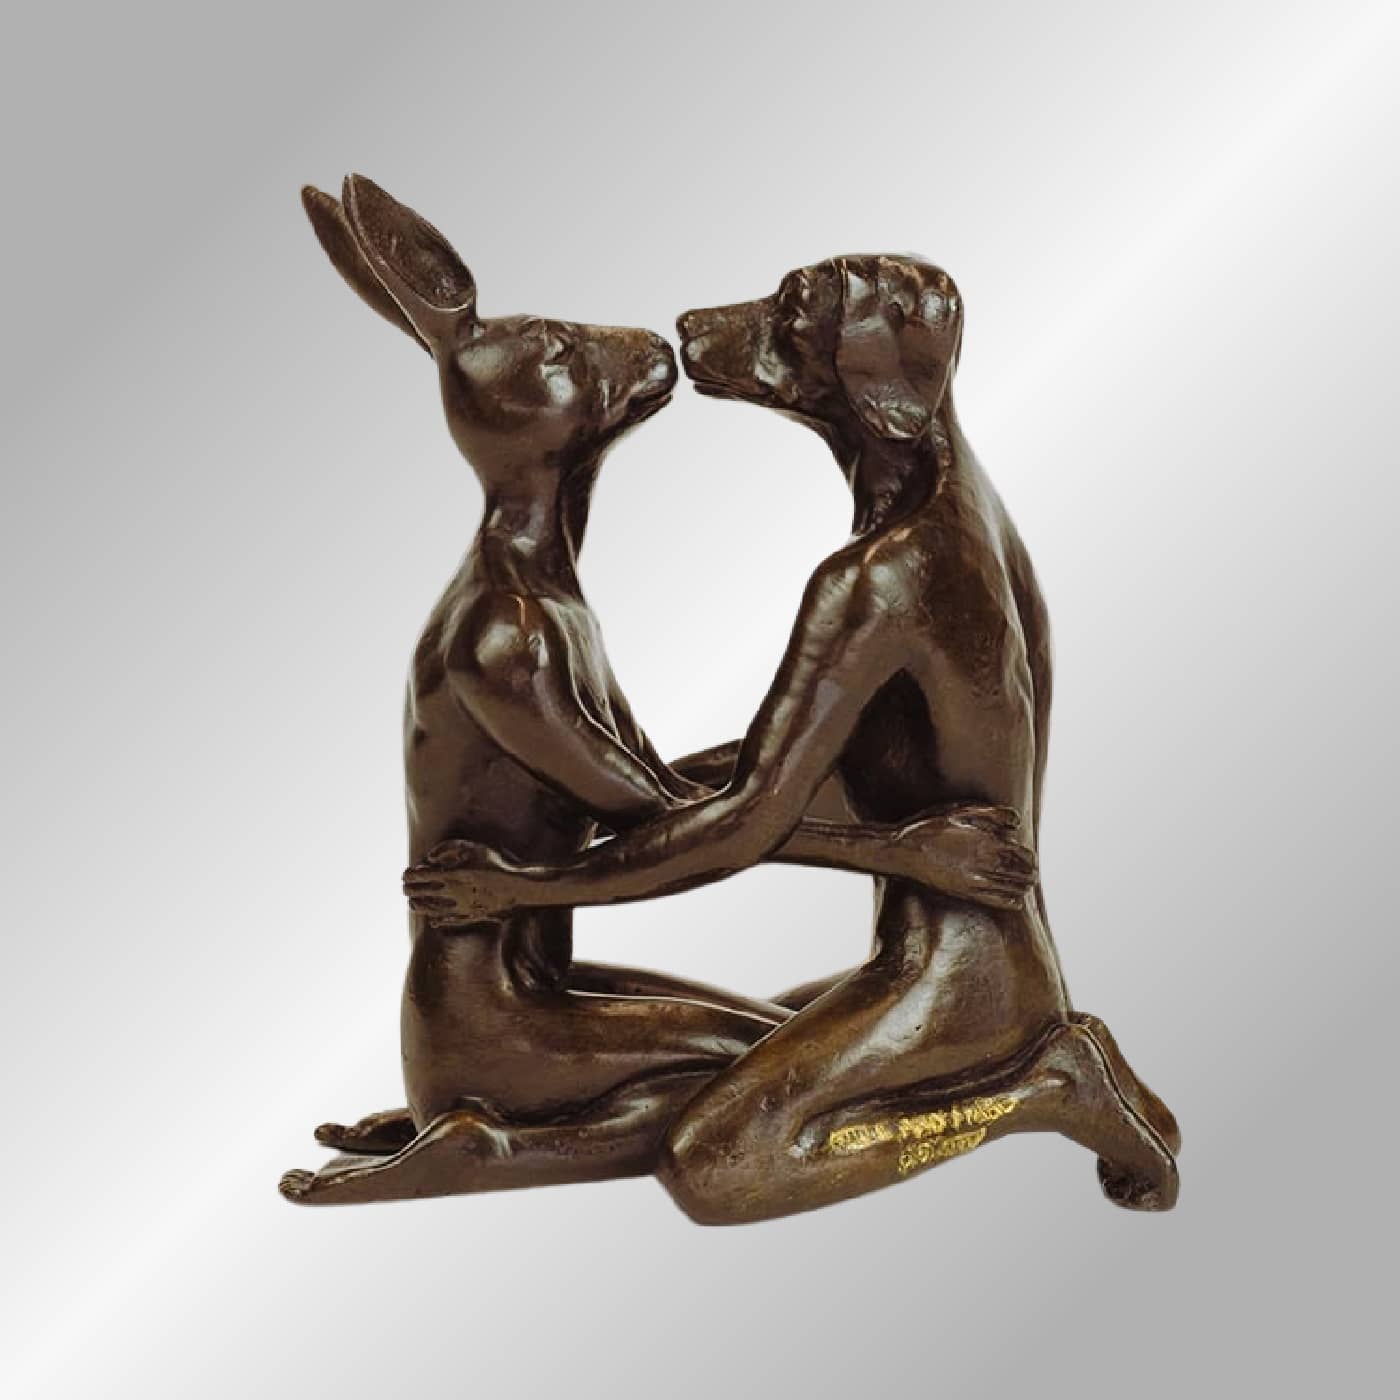 Gillie and Marc Bronze Sculpture ~ 'They Fell in Love Again' - Curate Art & Design Gallery Sorrento Mornington Peninsula Melbourne